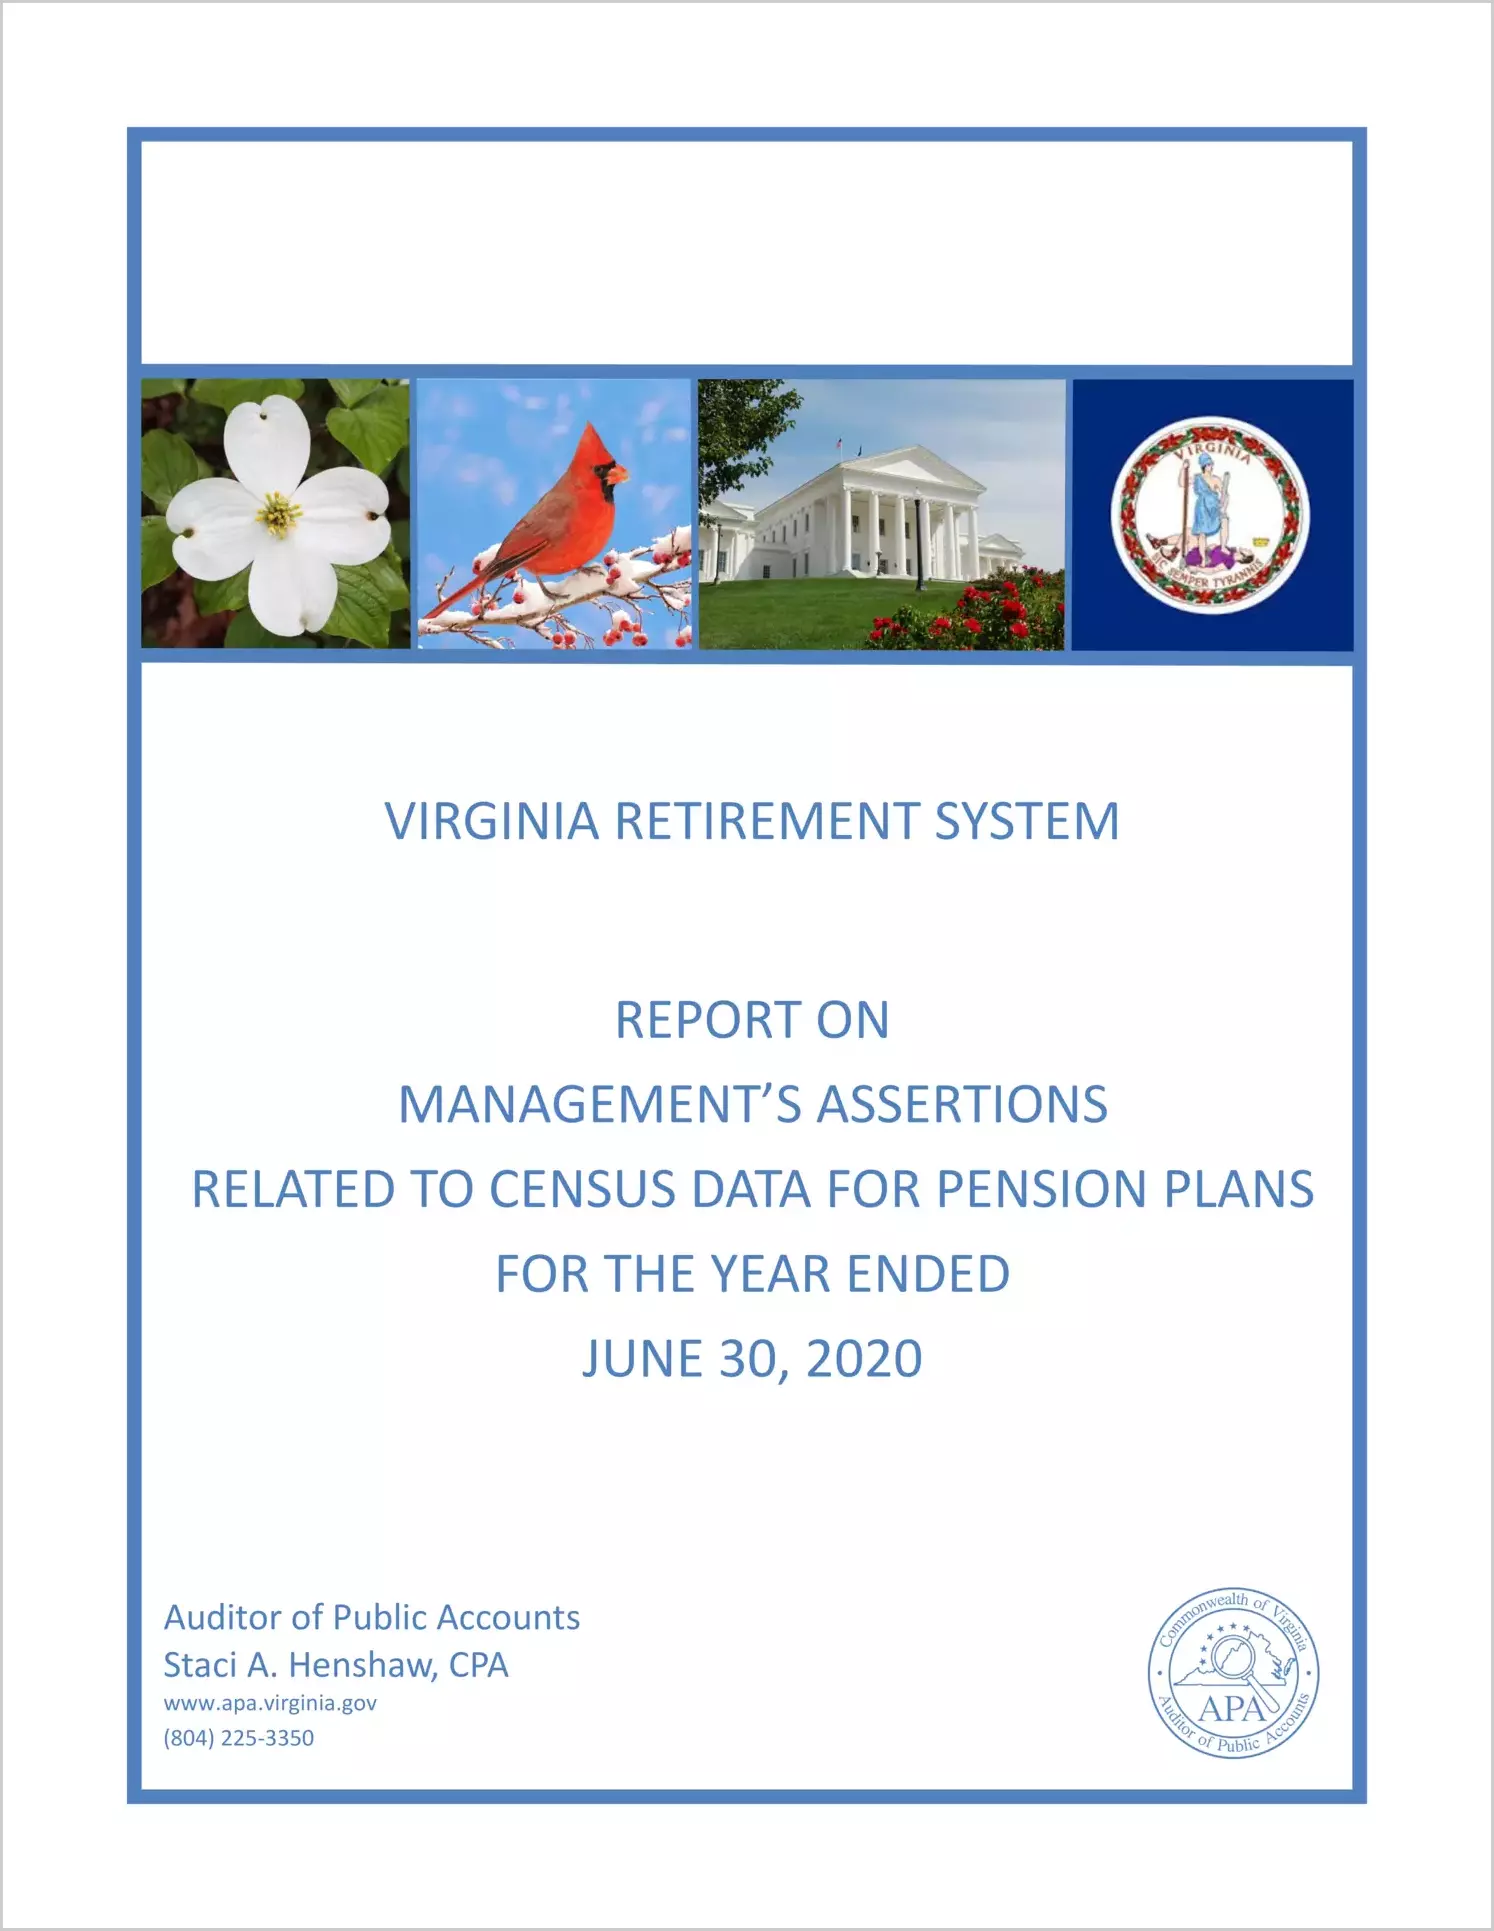 Virginia Retirement System Management's Assertions Related to Census Data for Pension Plans for the year ended June 30, 2020